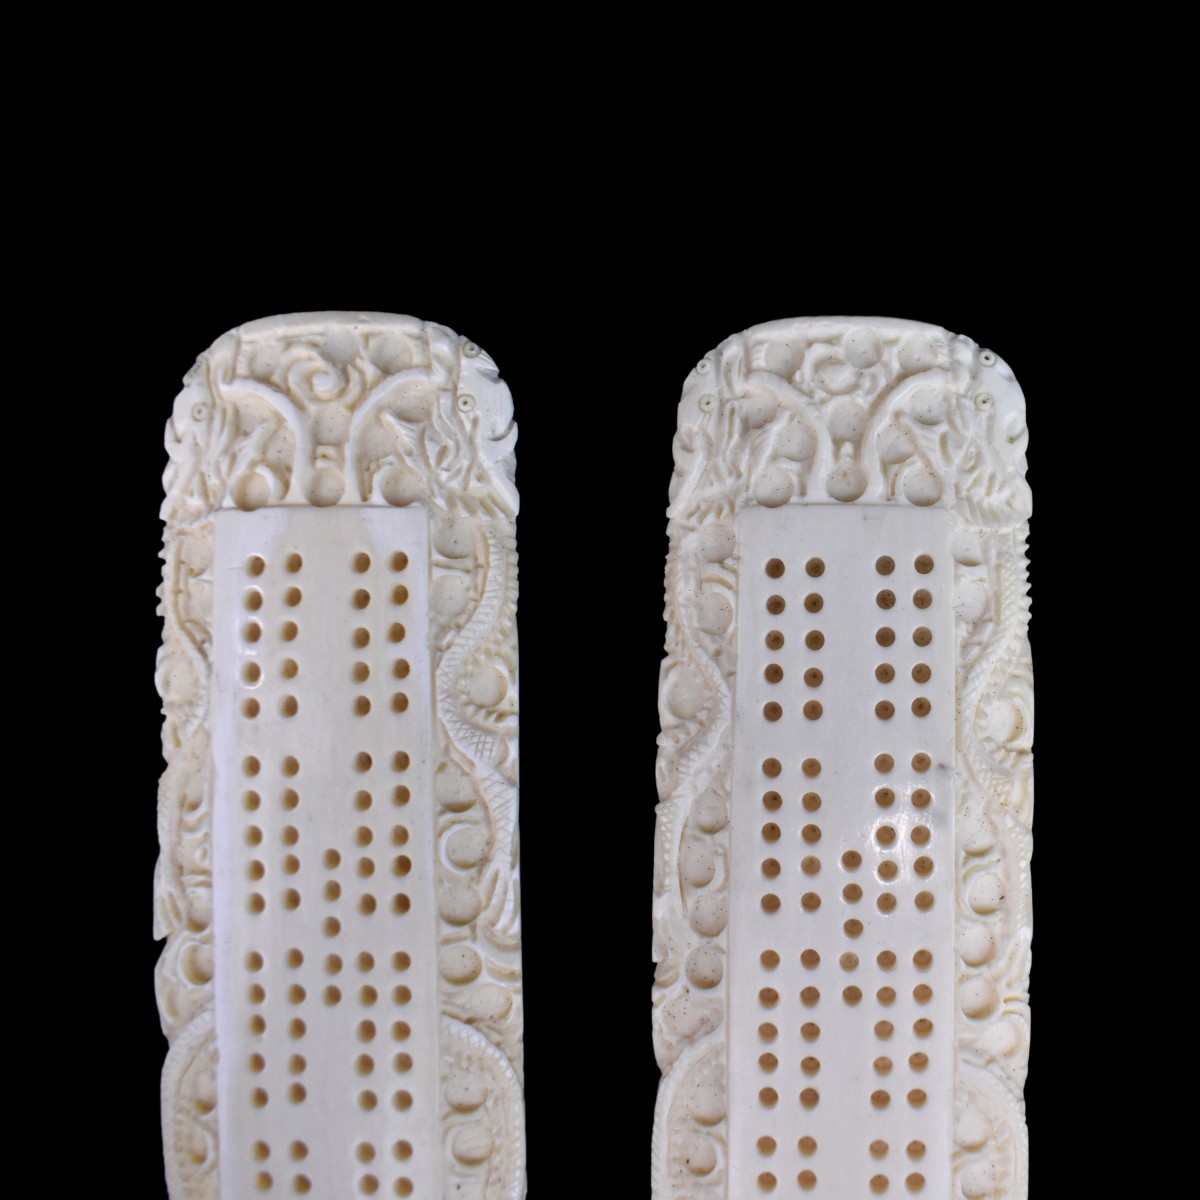 Chinese Cribbage Boards